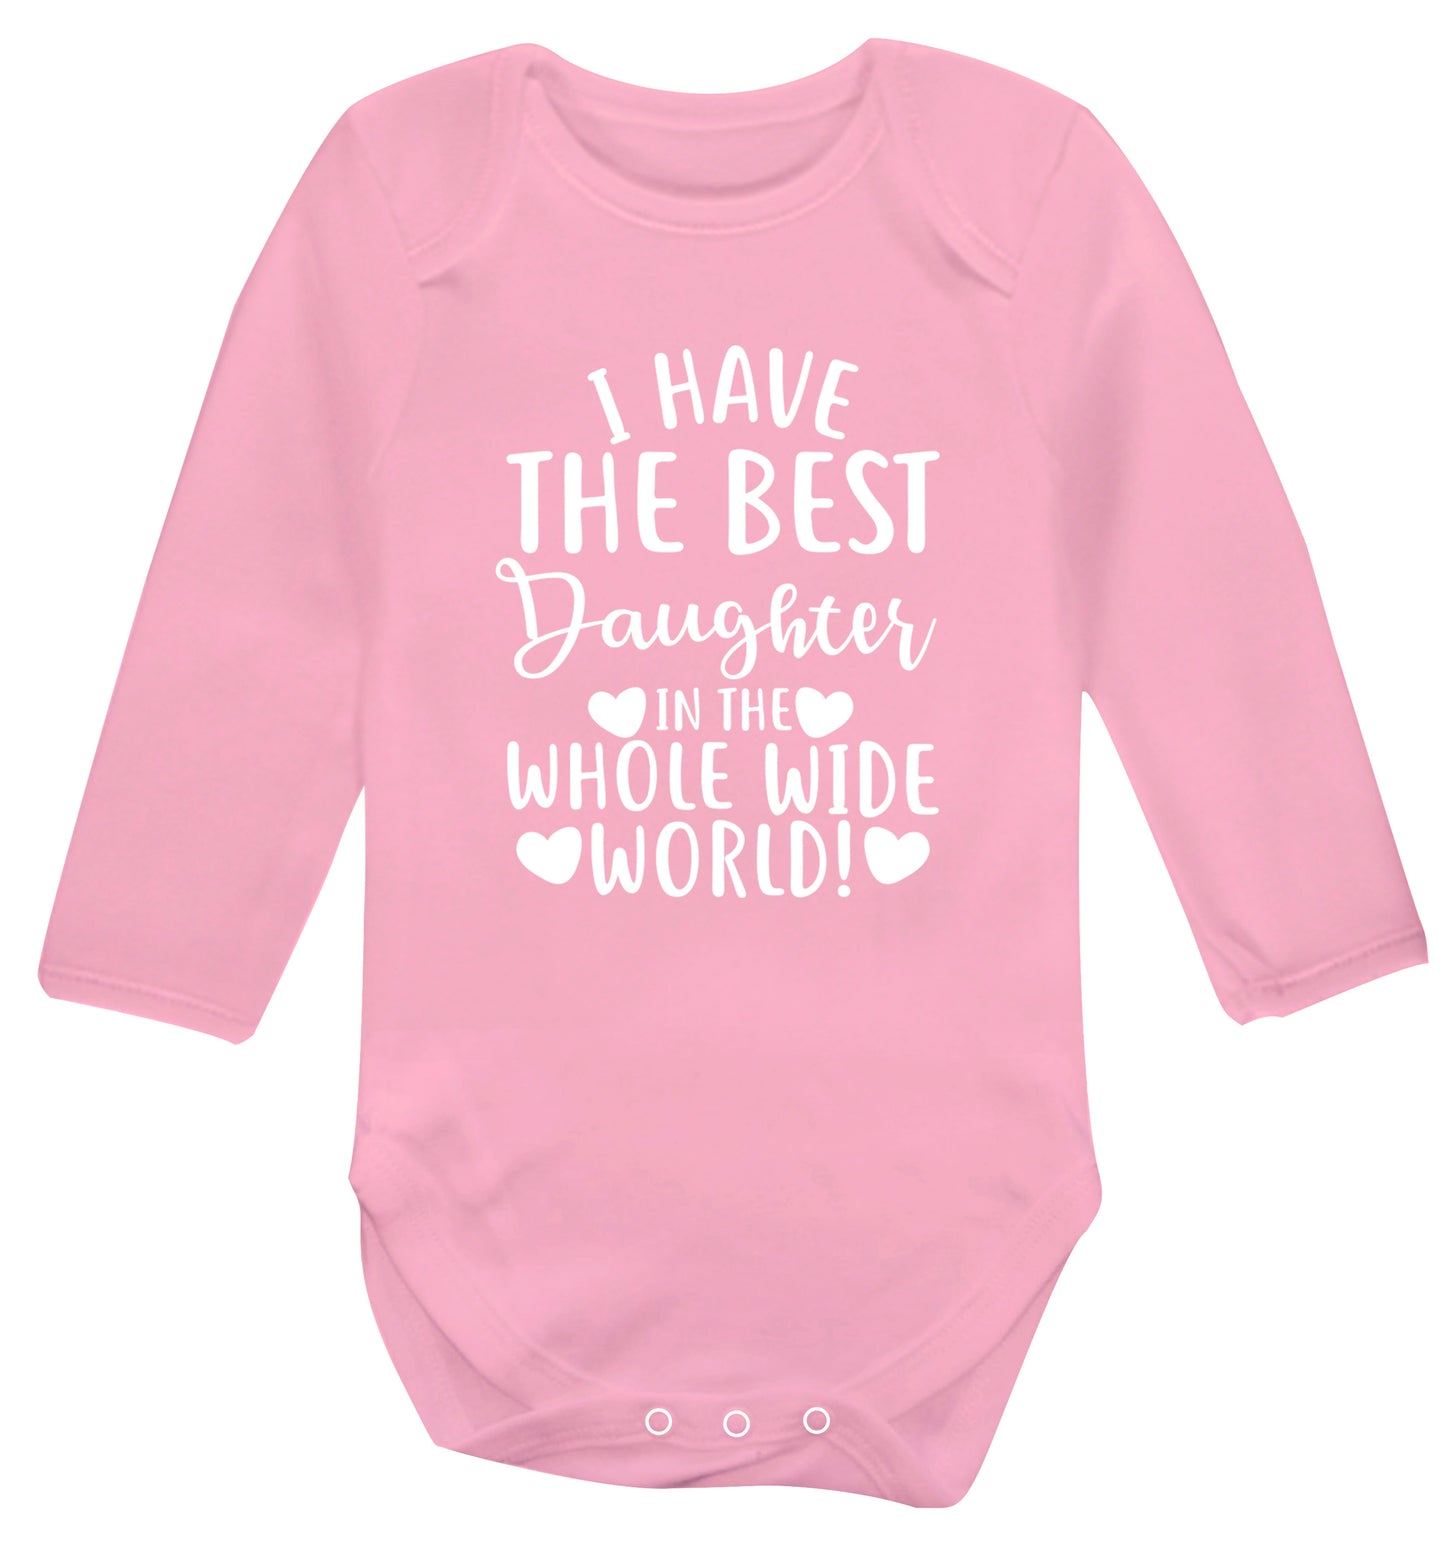 I have the best daughter in the whole wide world! Baby Vest long sleeved pale pink 6-12 months